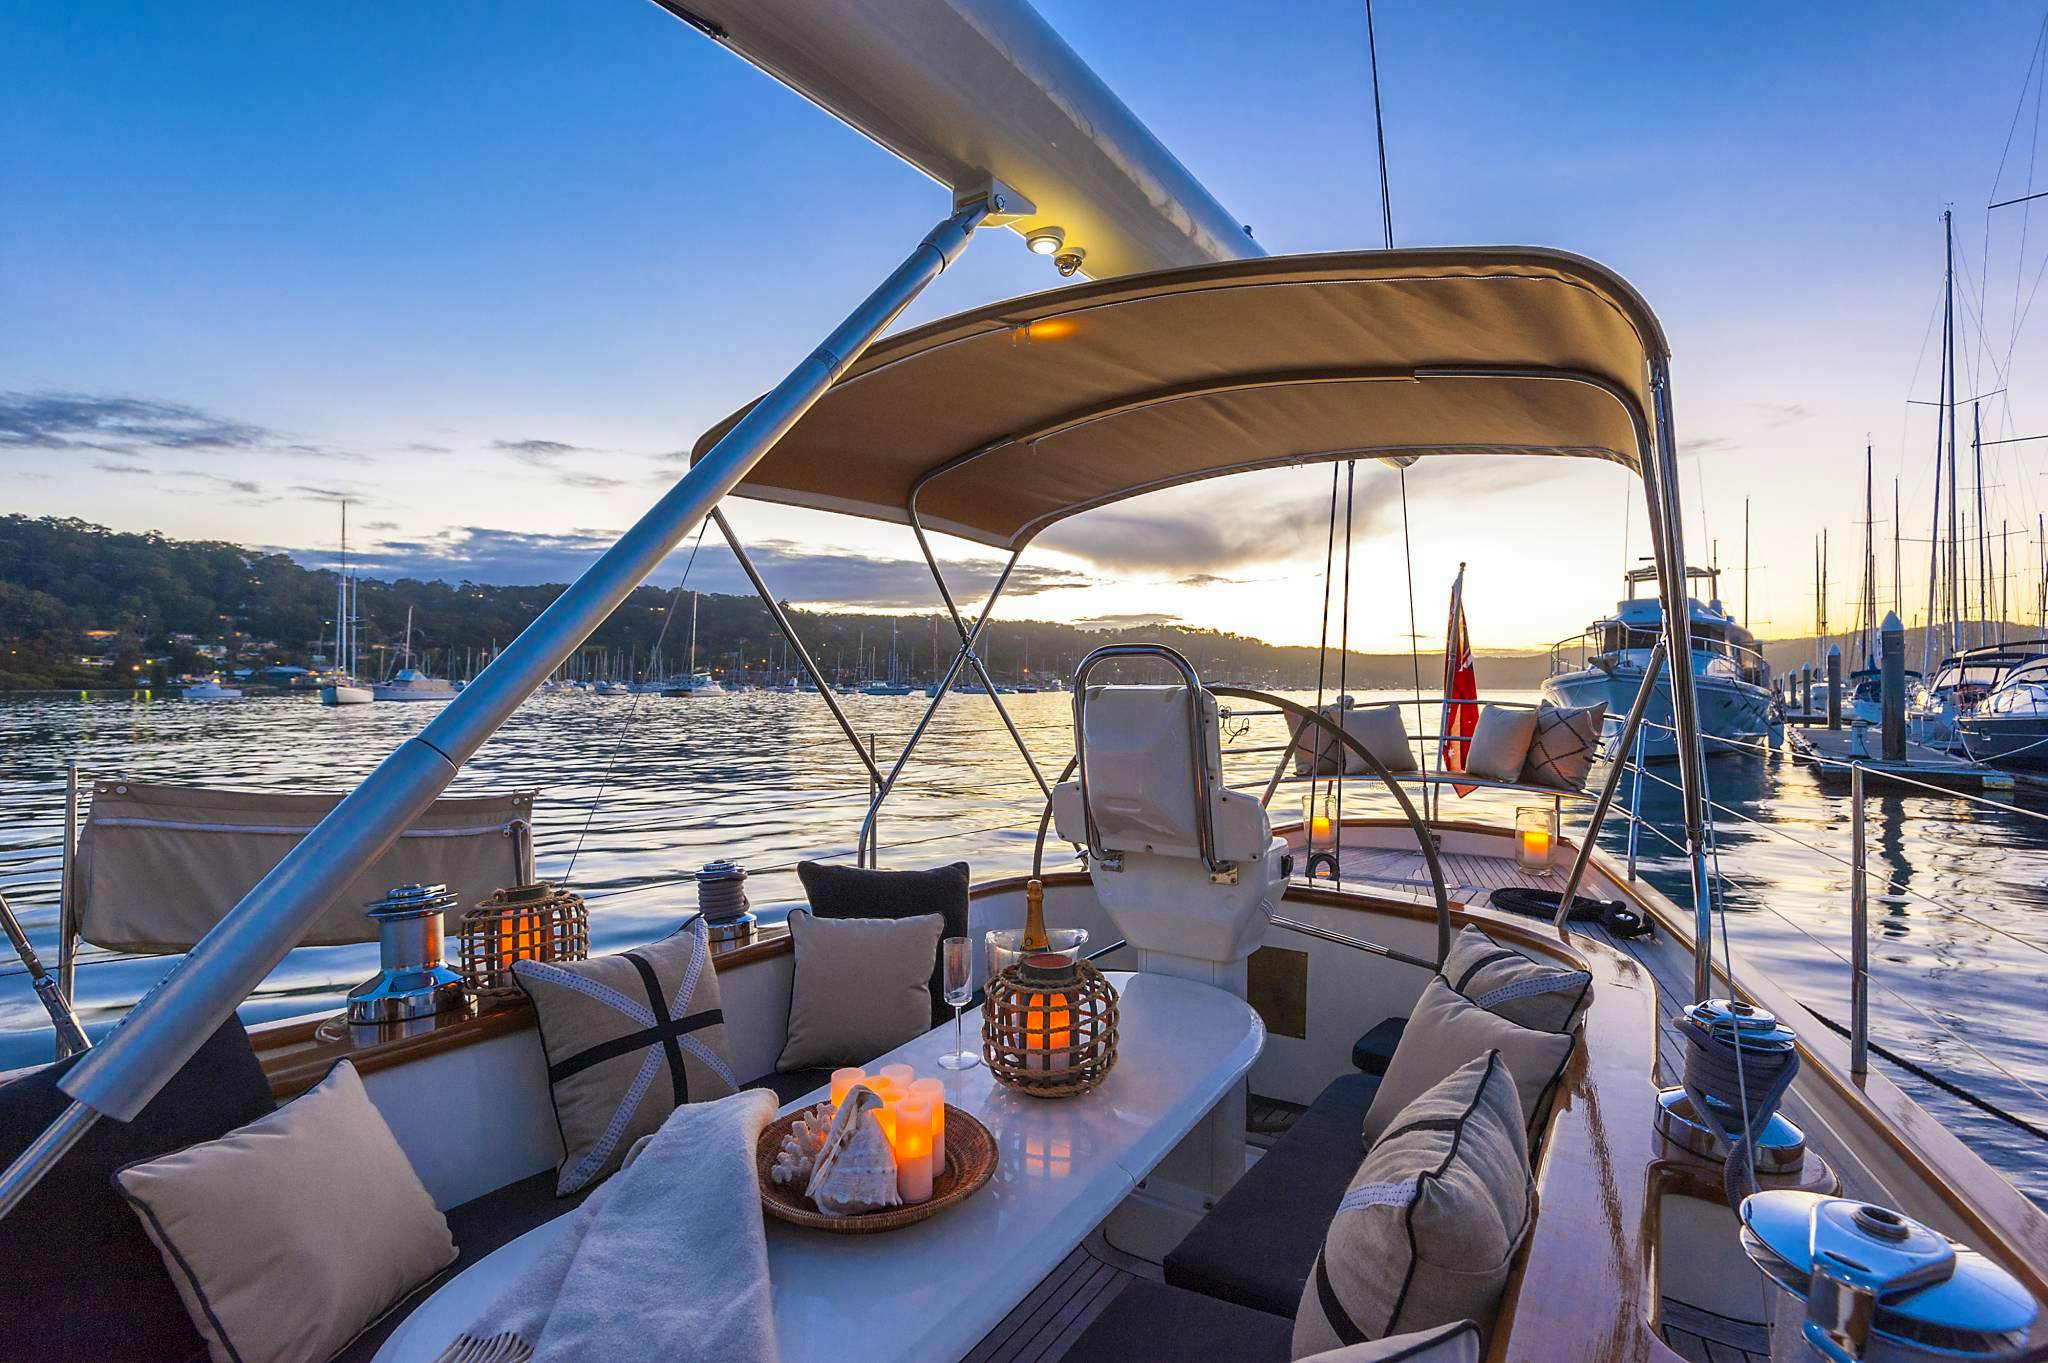 Yacht Ride (02 Hours) with Transfers